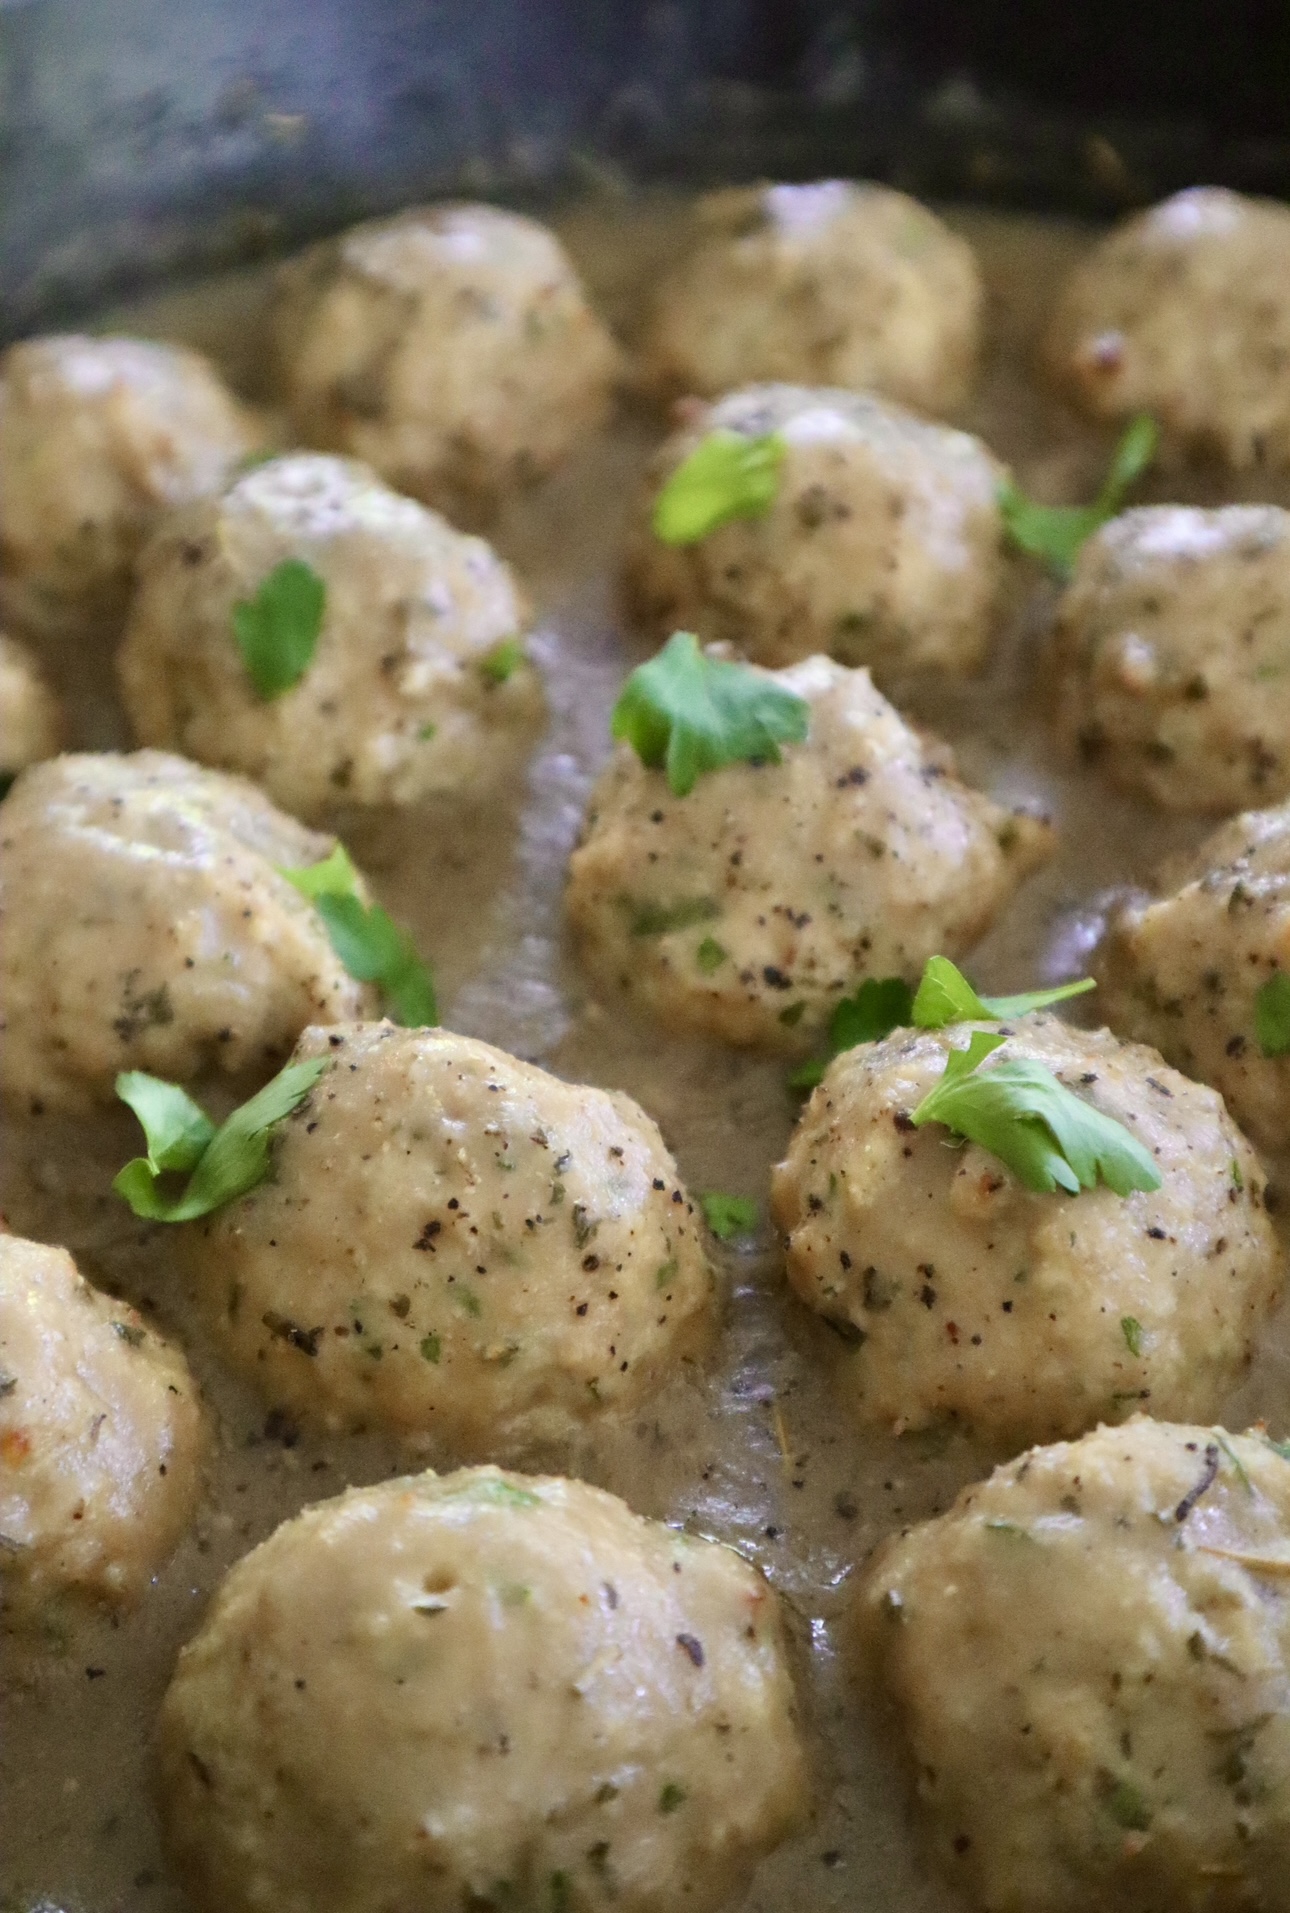 baked chicken meatballs with gravy